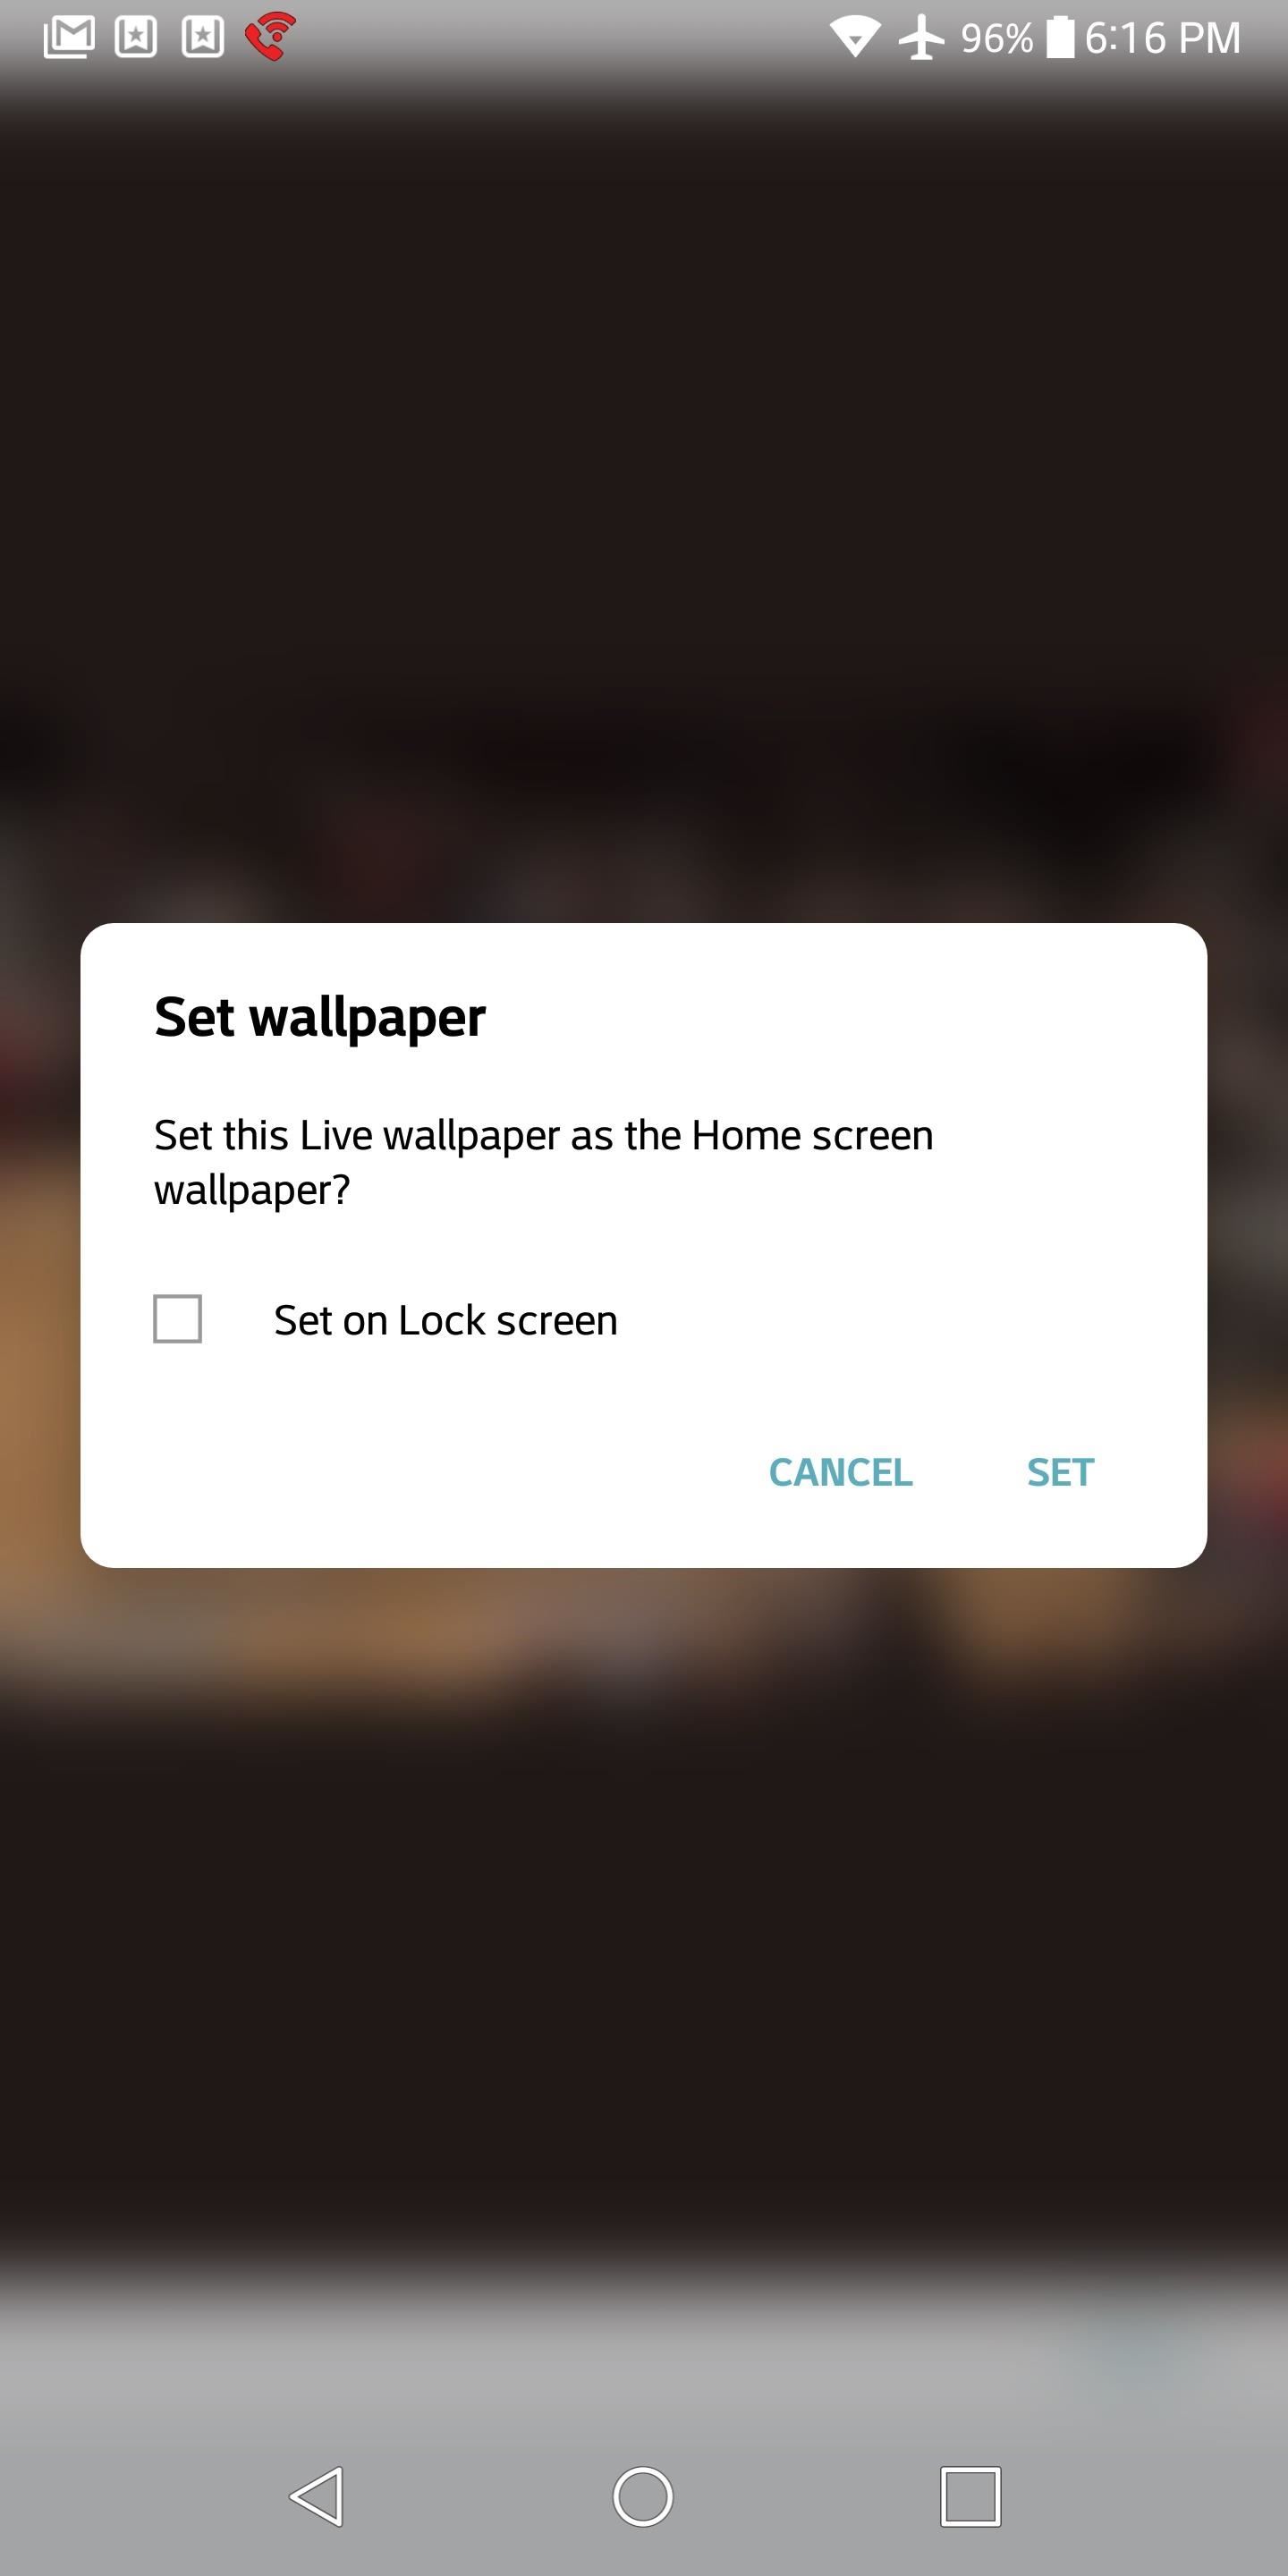 How To Set A Gif As The Wallpaper On Your Android S Home Or Lock